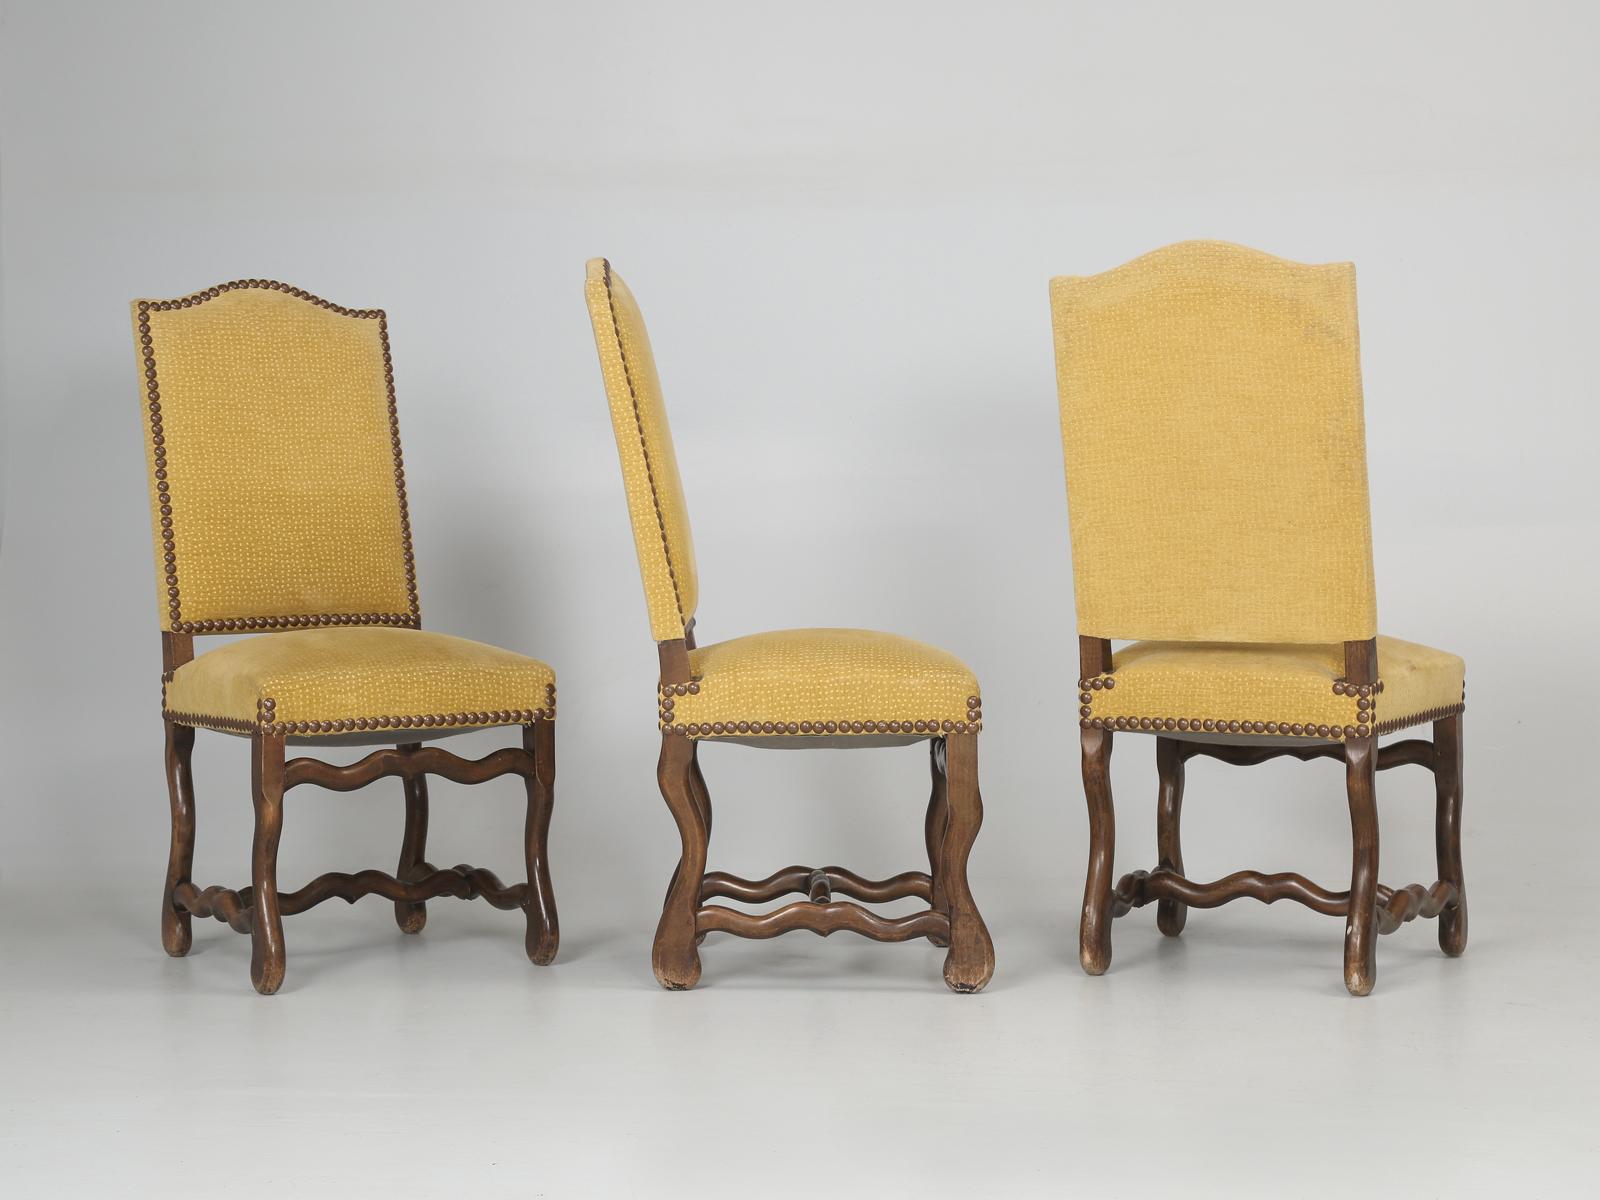 French Louis XIII style “Os de Mouton” dining chairs, which have been one of our most popular French dining chairs over the last 30 years. Together with our Louis XVI French dining chairs, the two styles represent 90% of all French chairs we sell.